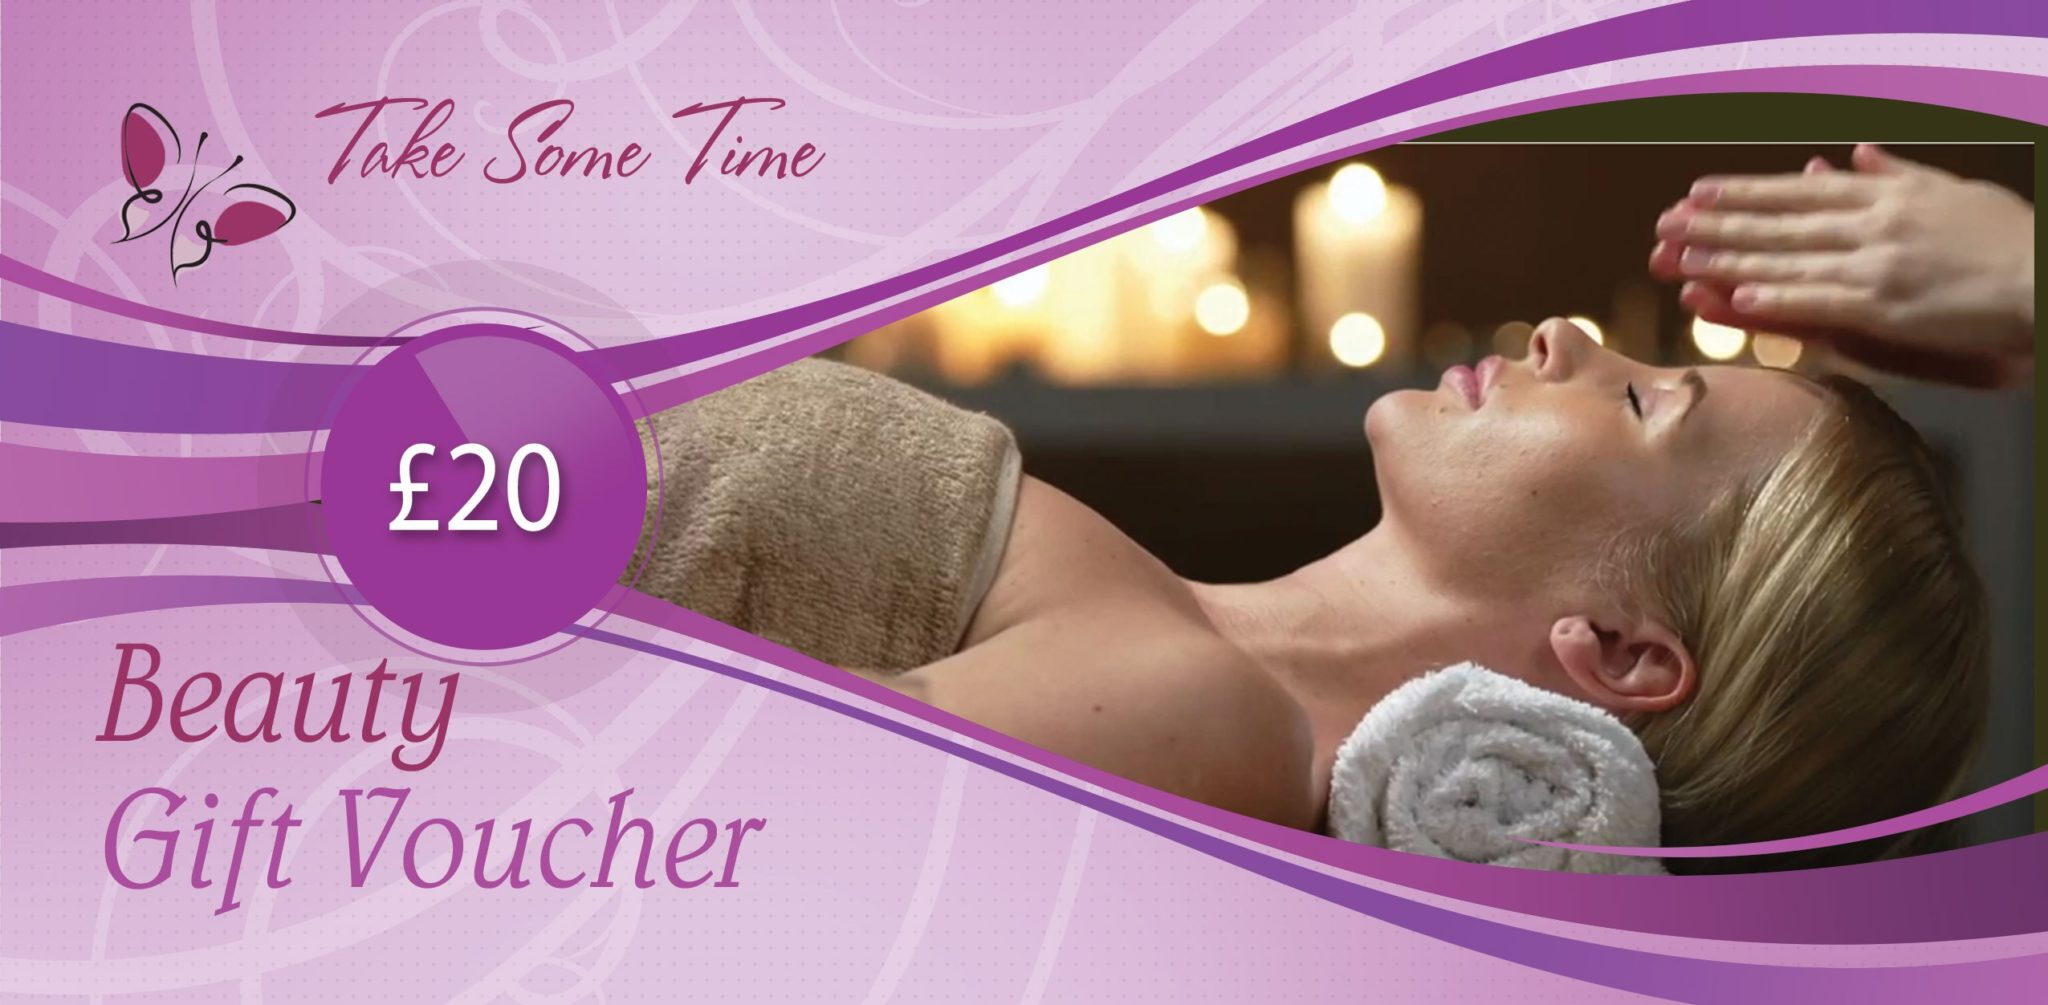 Massage Treatments In Chelmsford Take Some Time